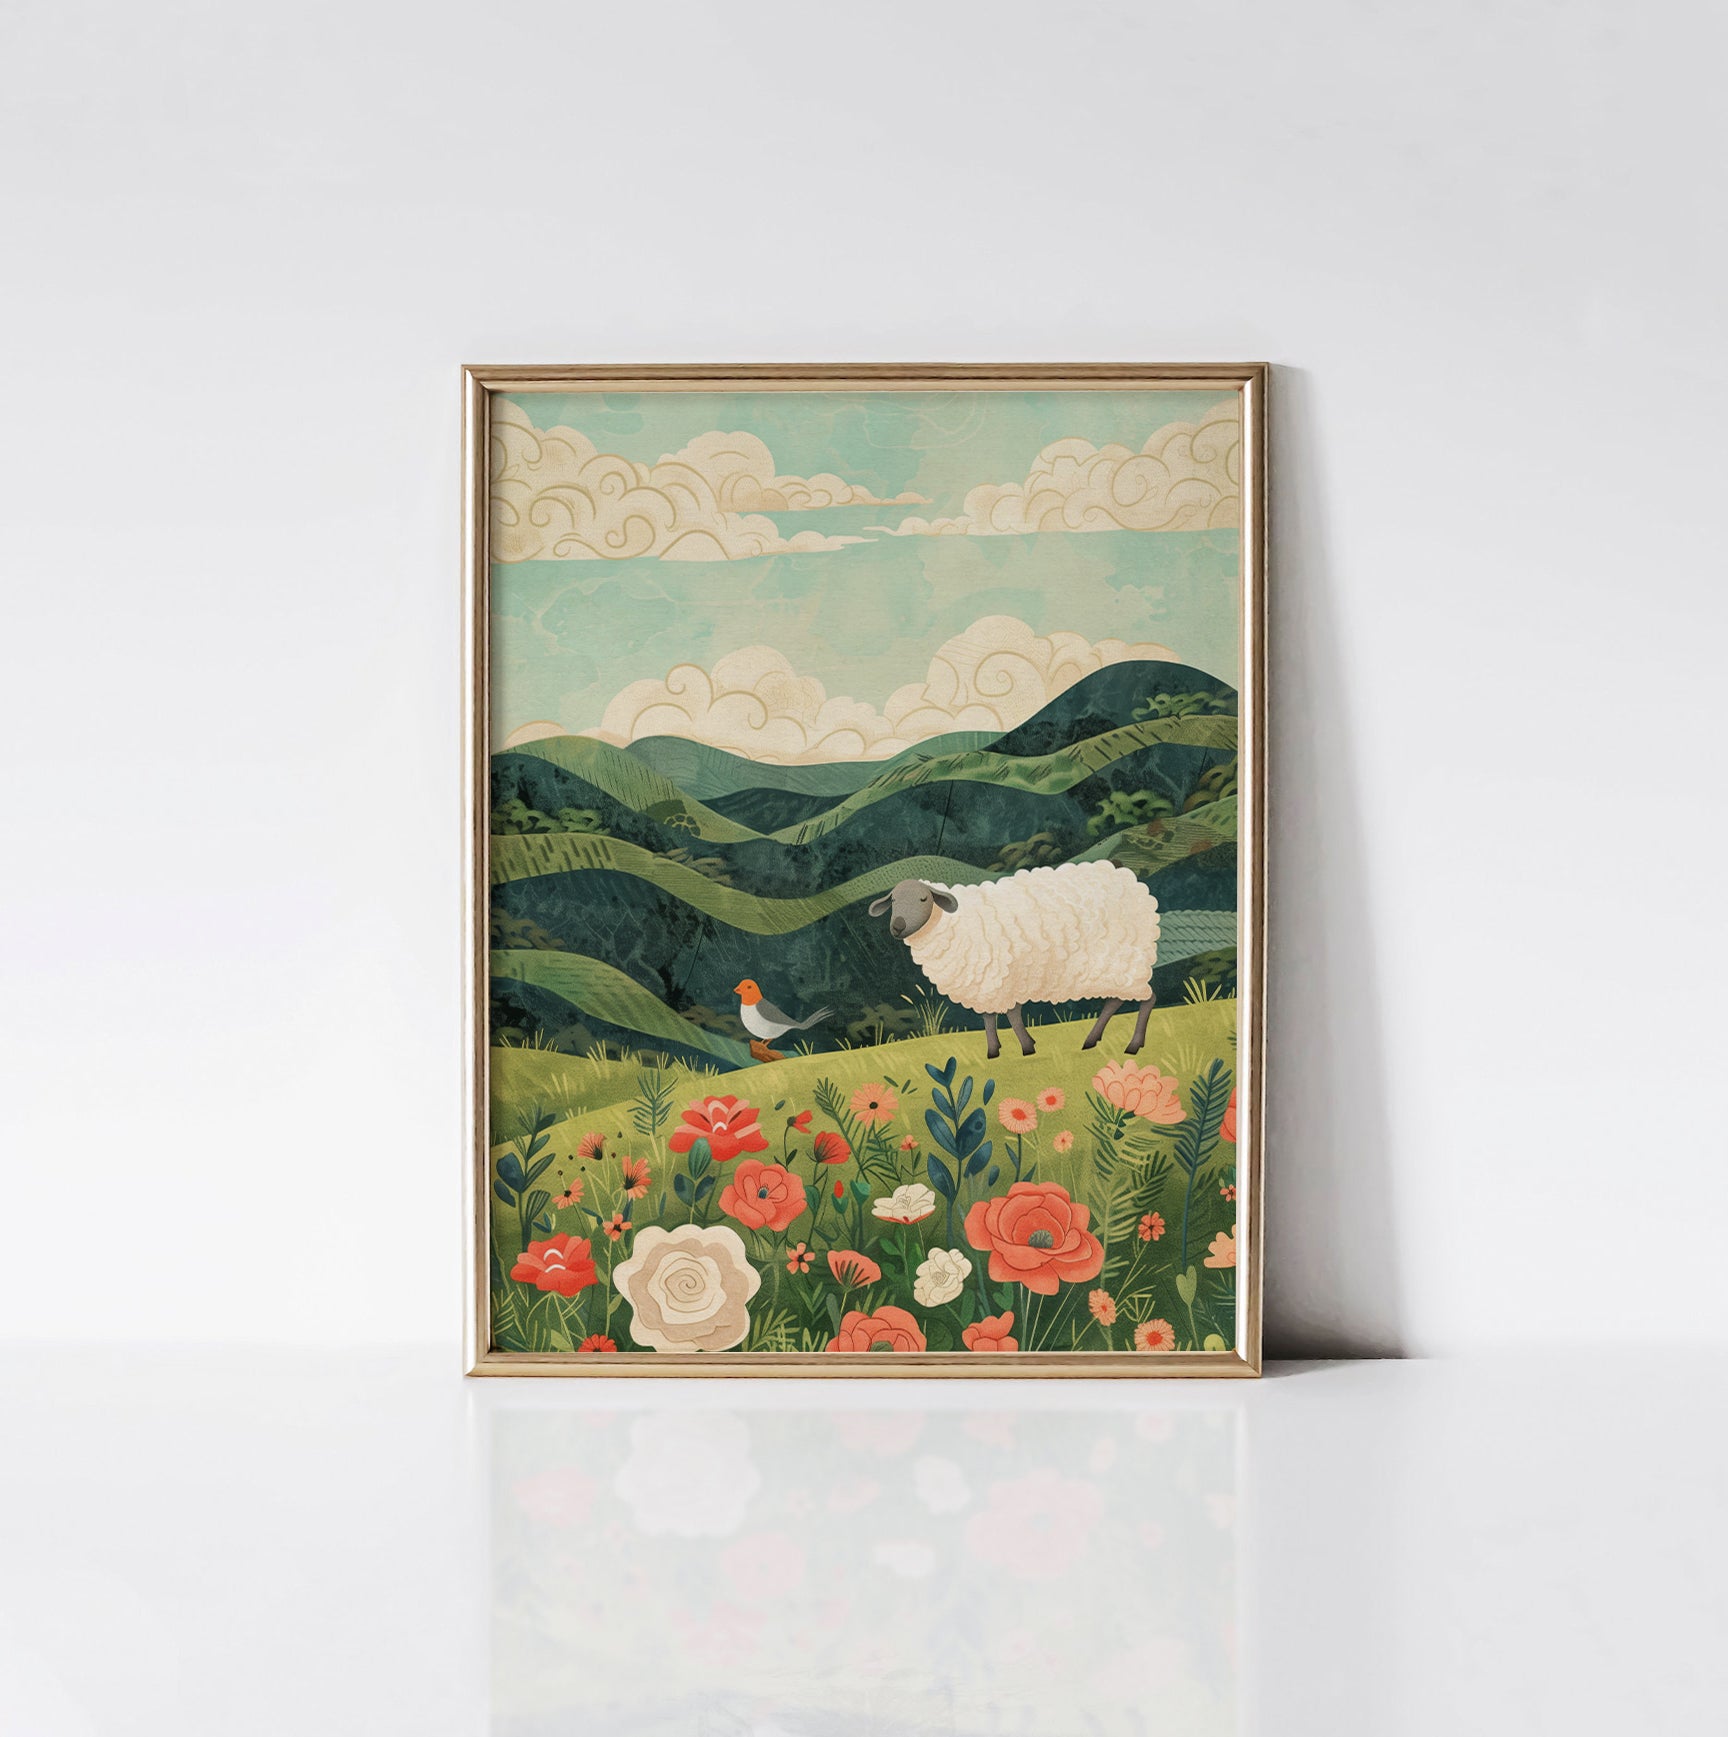 Pastoral Serenity art print displayed in a sleek gold frame, featuring a serene landscape with rolling green hills, a fluffy sheep, and vibrant flowers.